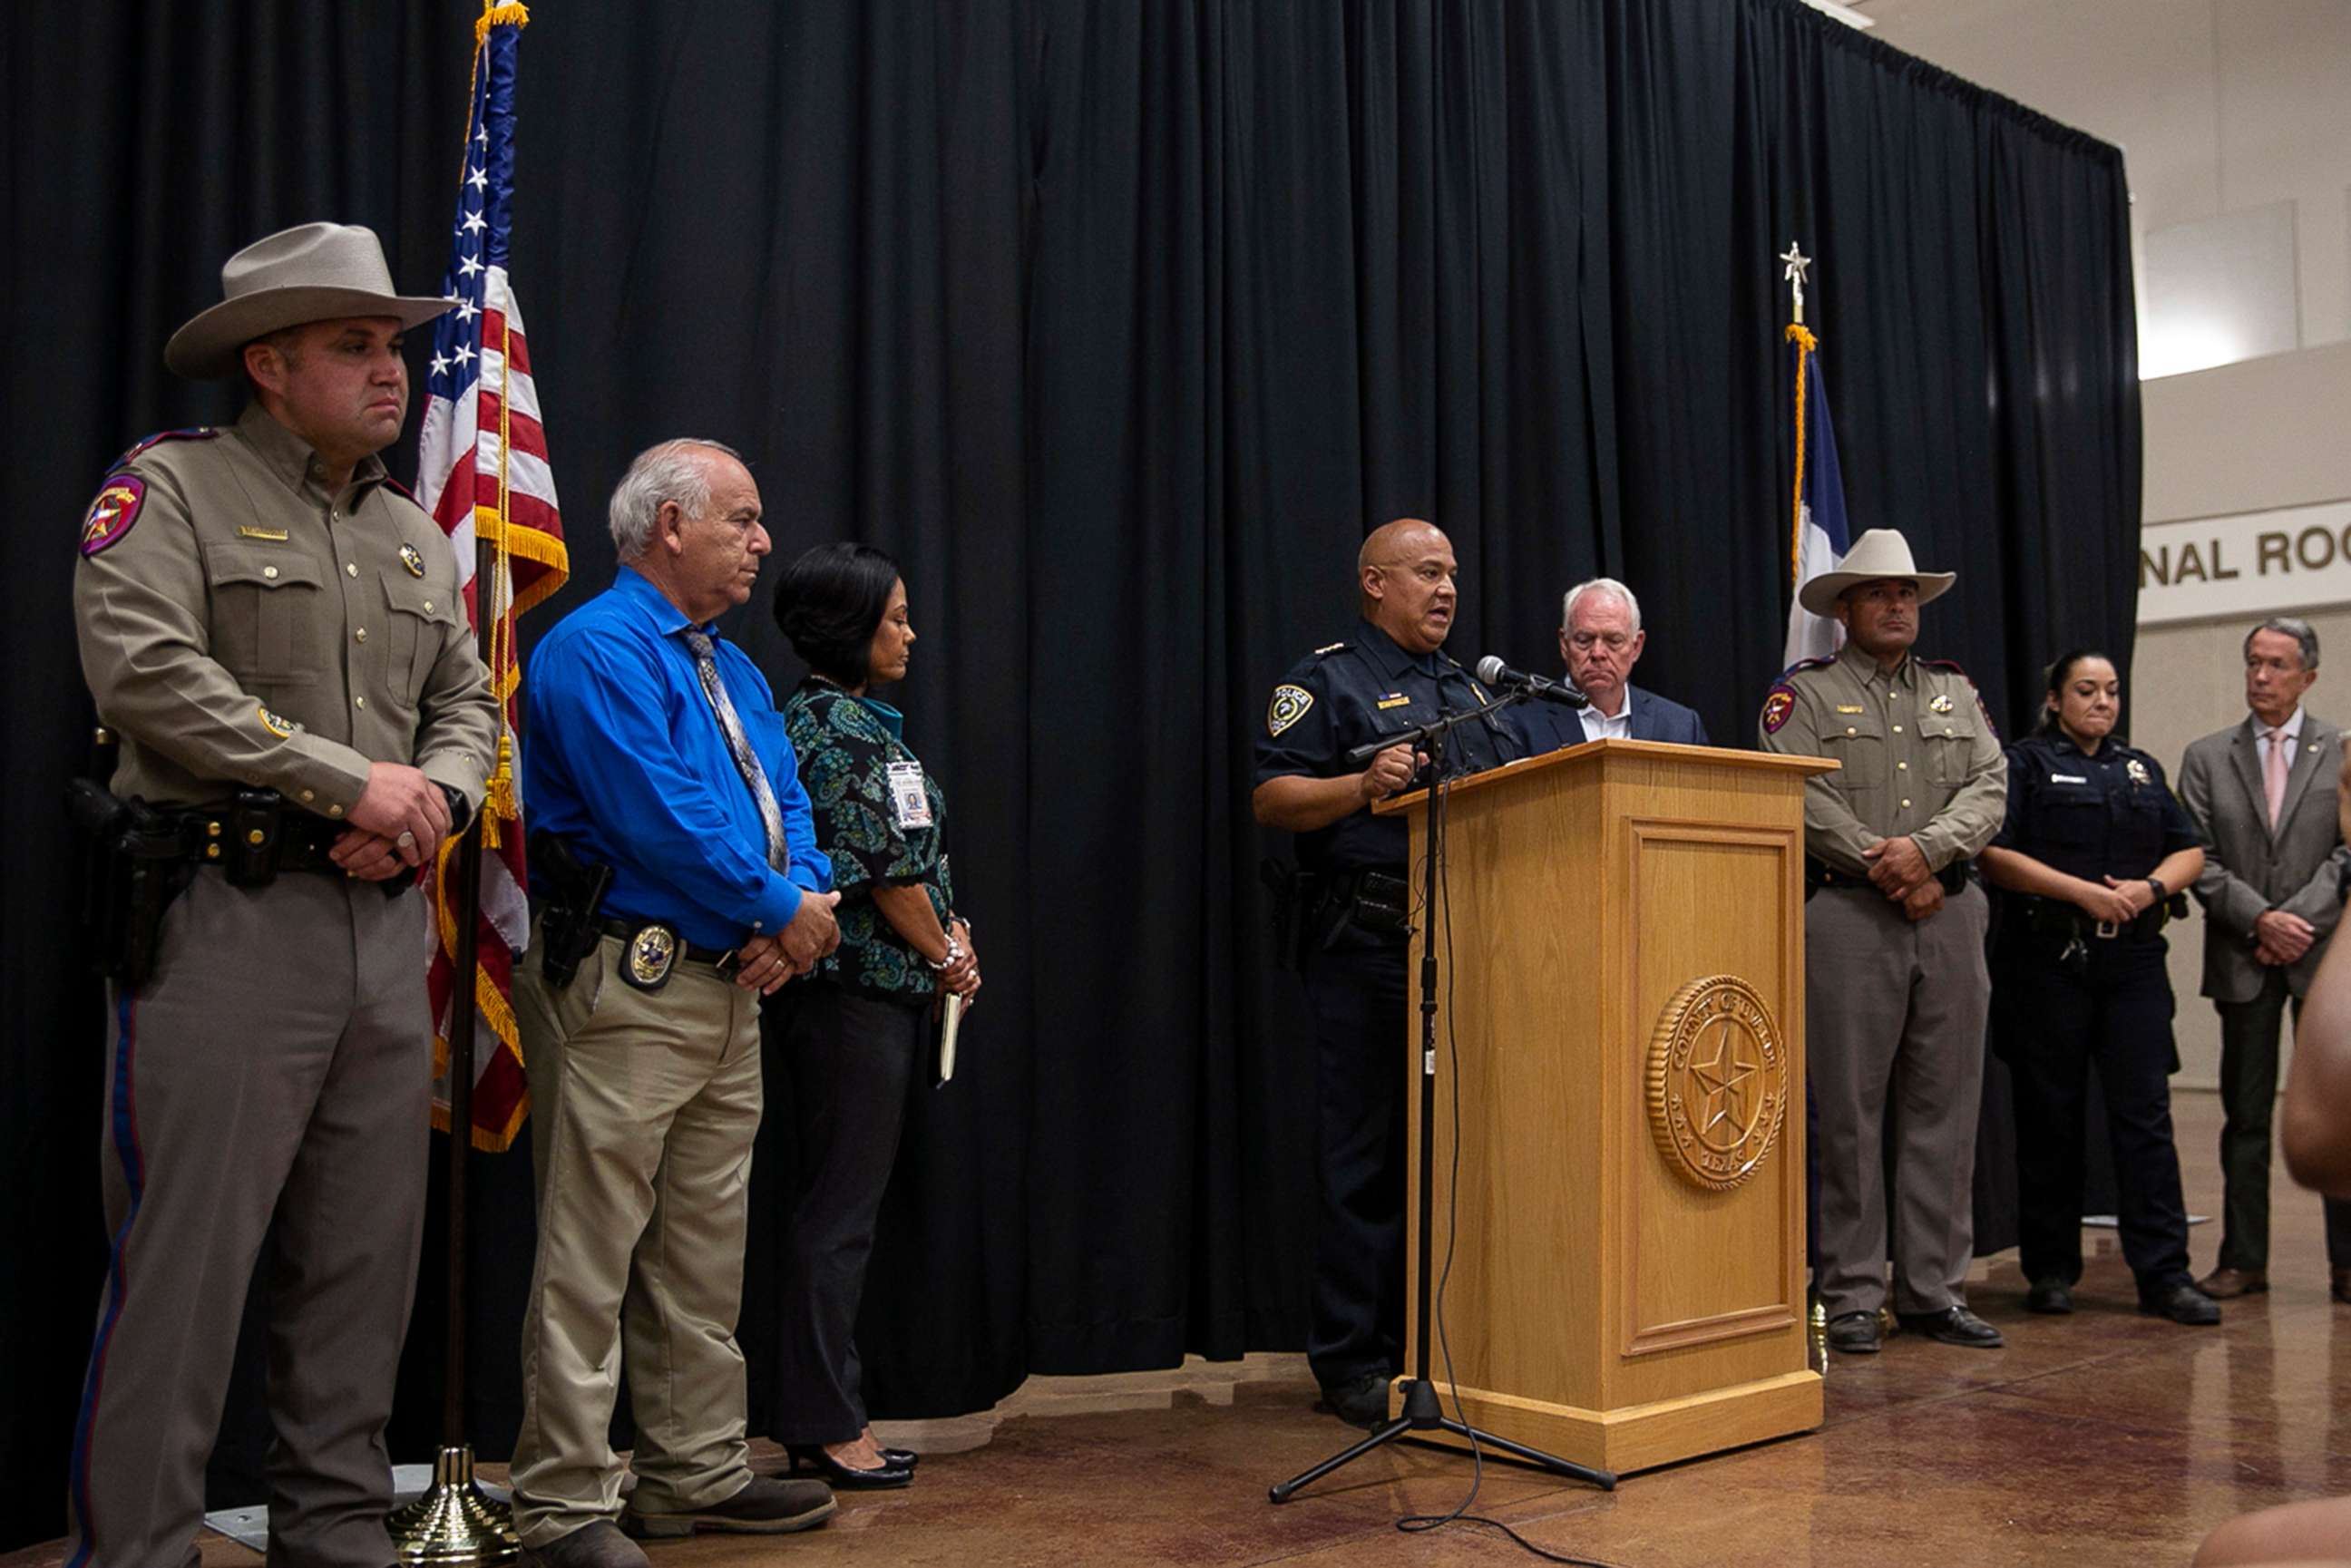 PHOTO: Uvalde school police chief Pete Arredondo speaks at a press conference following the shooting at Robb Elementary School in Uvalde, Texas, May 24, 2022.